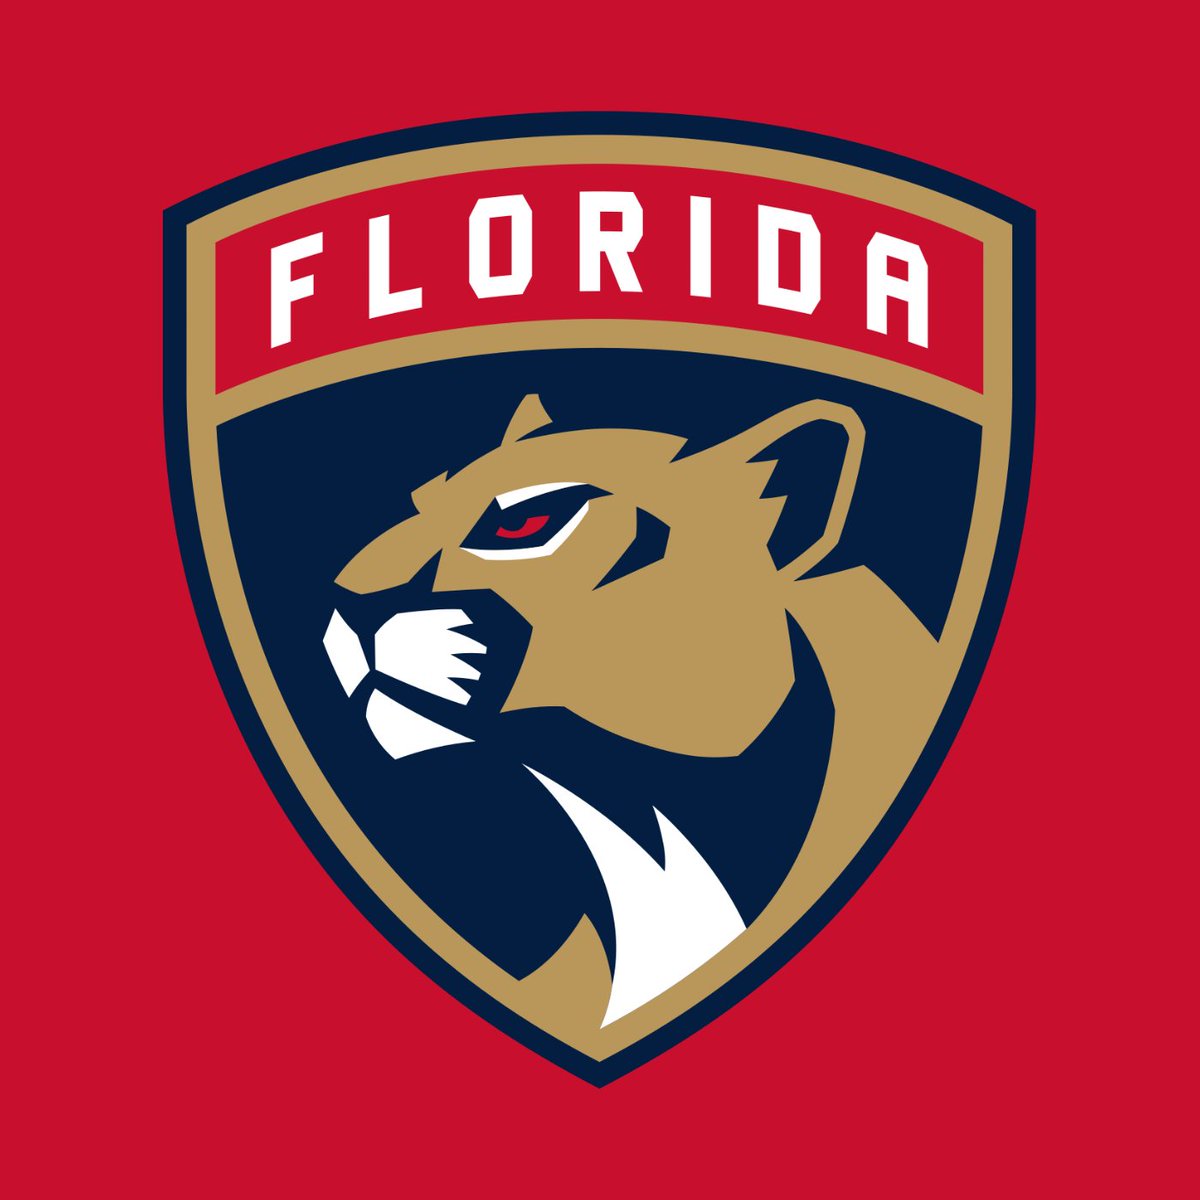 With the 19th overall selection in the NHL Draft, the Florida Panthers are proud to select: Wanda. https://t.co/LLNa1gftx9